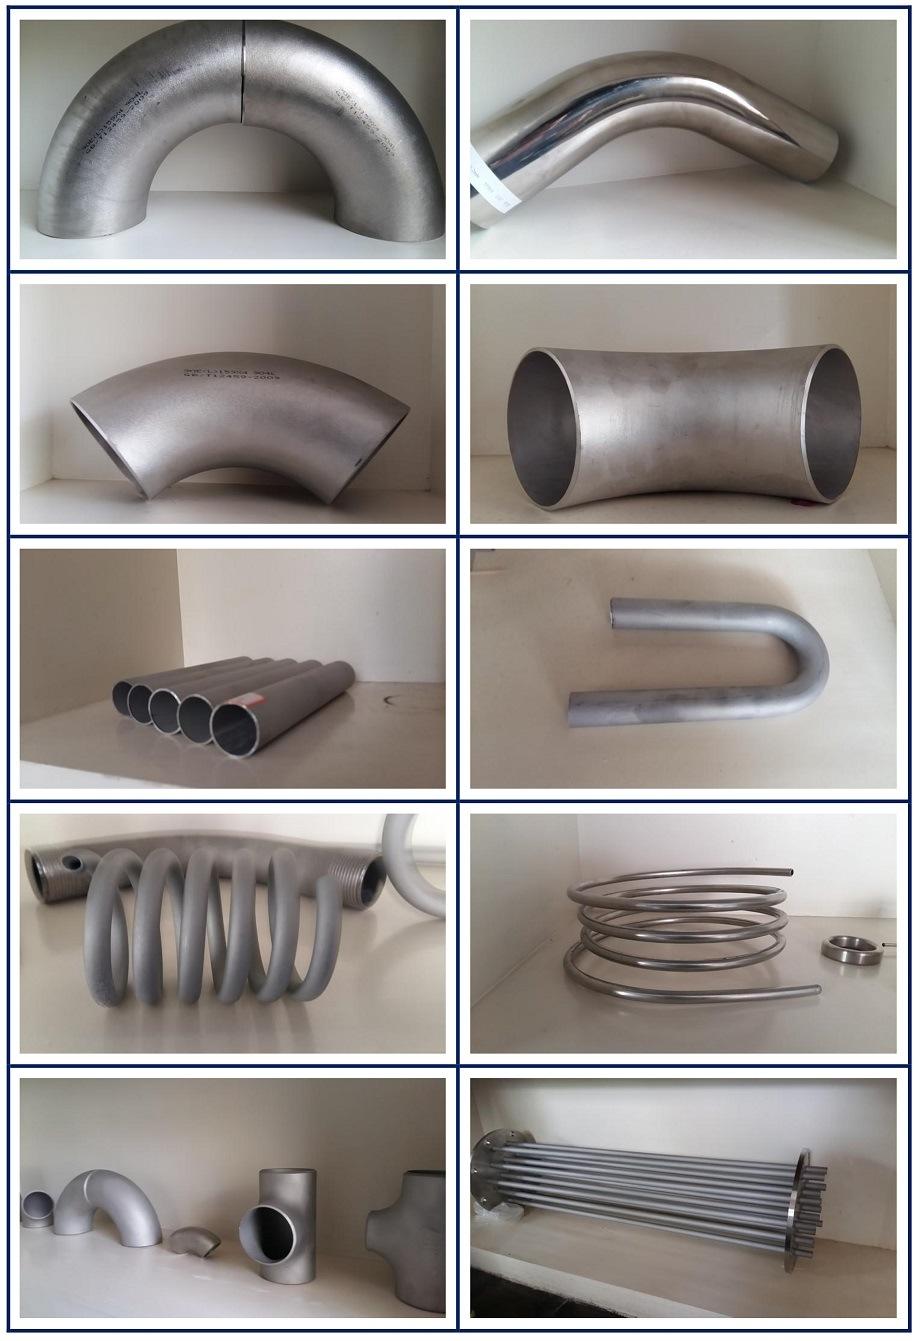 Dielectric Union Stainless Steel to Copper Price